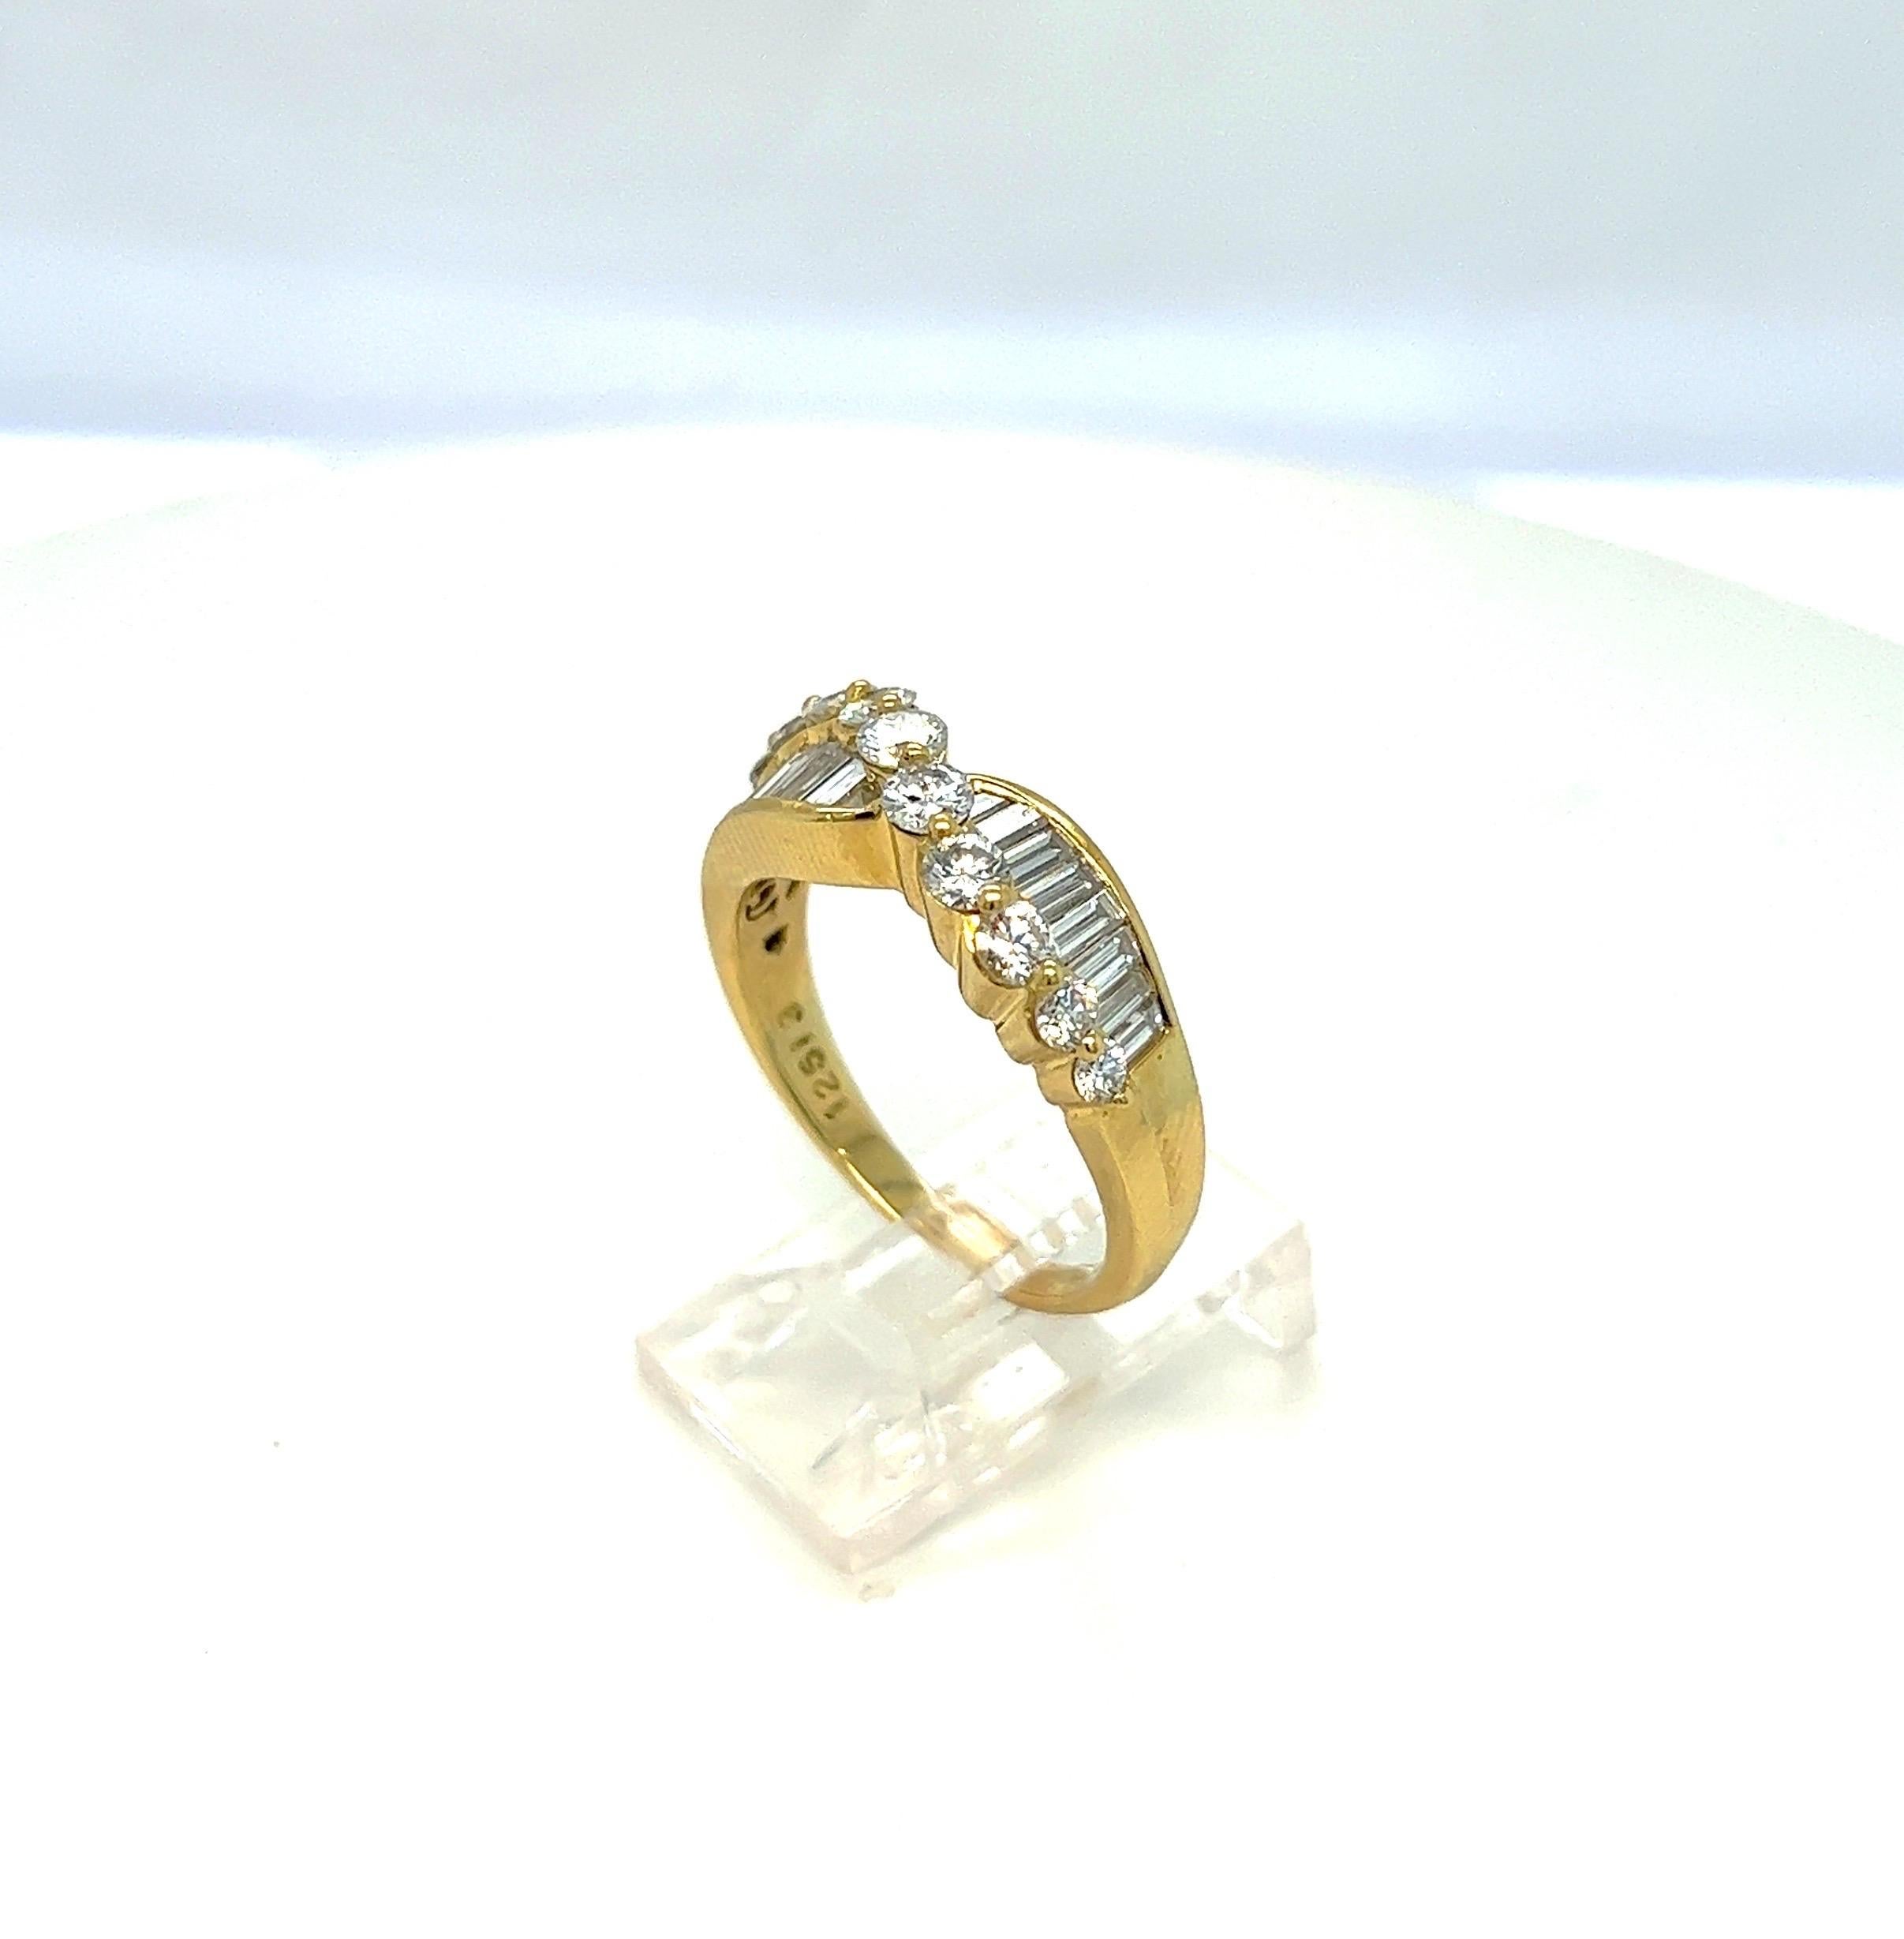 Nova 18KT Yellow Gold 1.93 Cts. Round and Baguette Diamond Ring For Sale 1